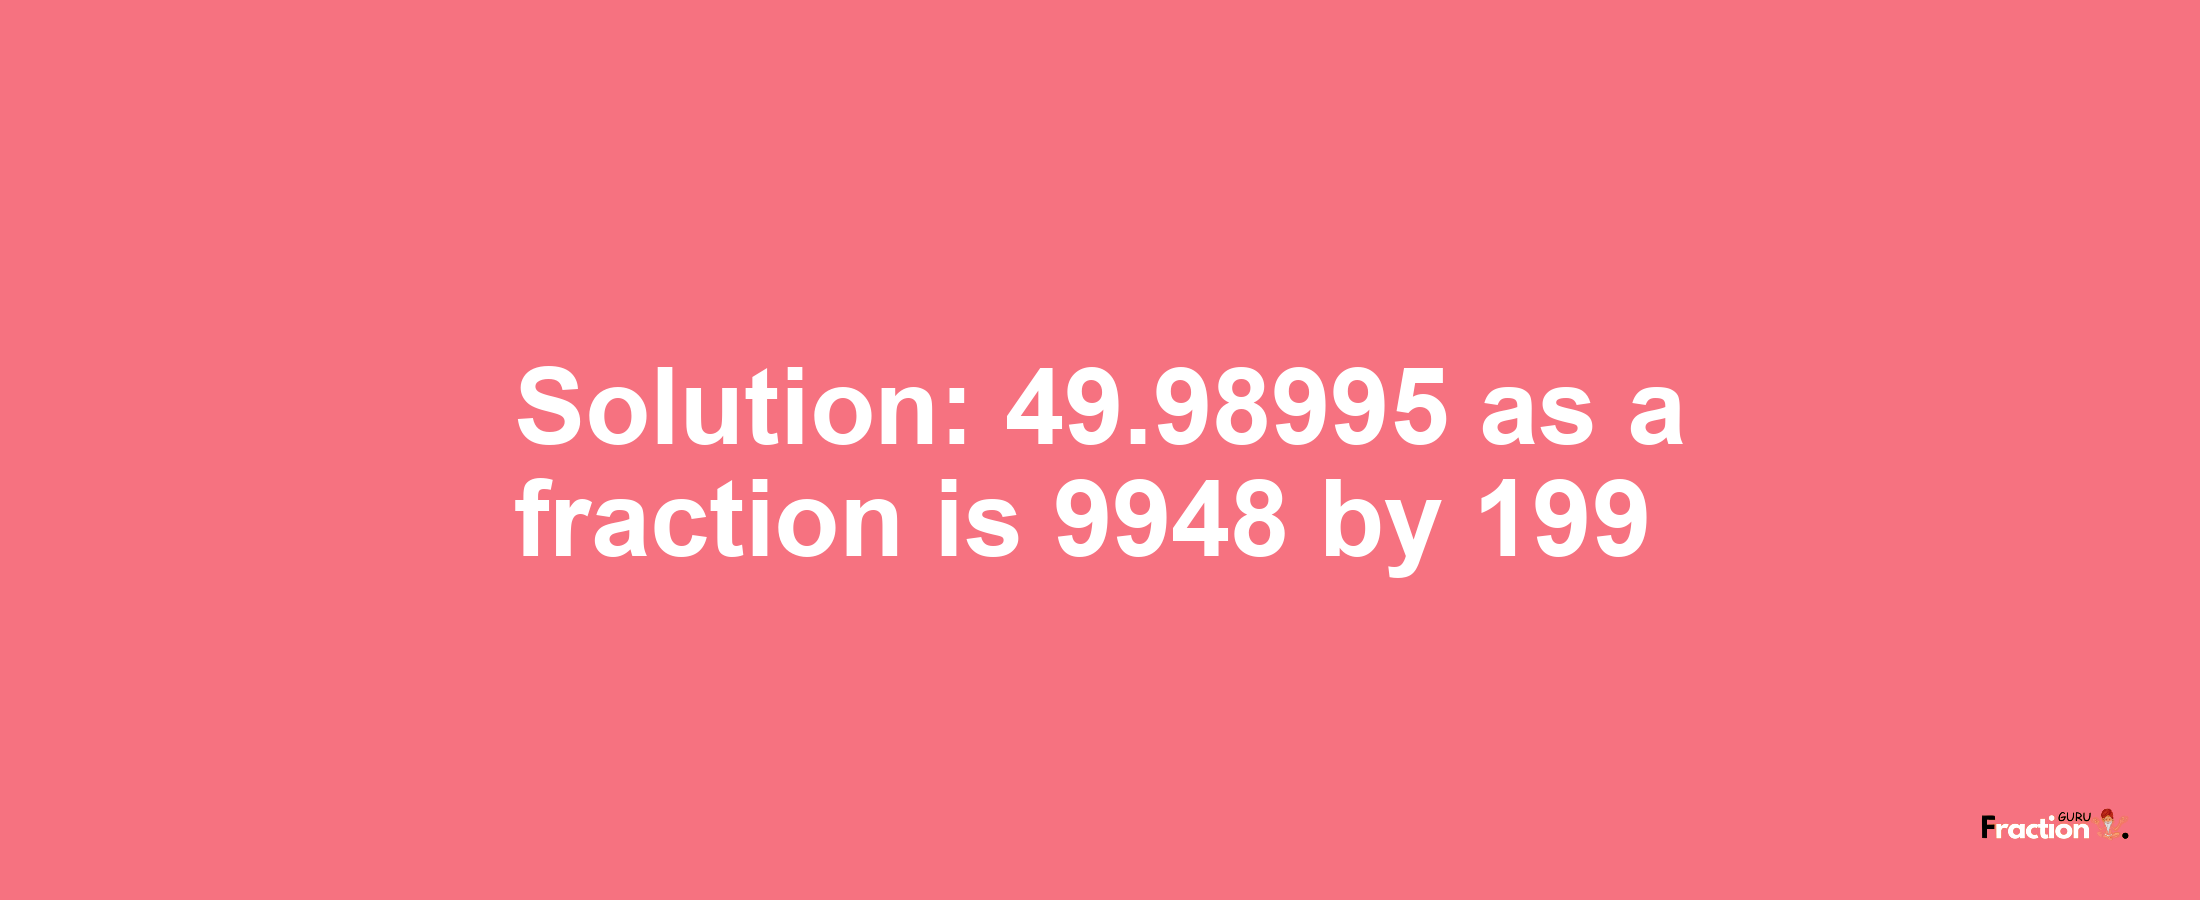 Solution:49.98995 as a fraction is 9948/199